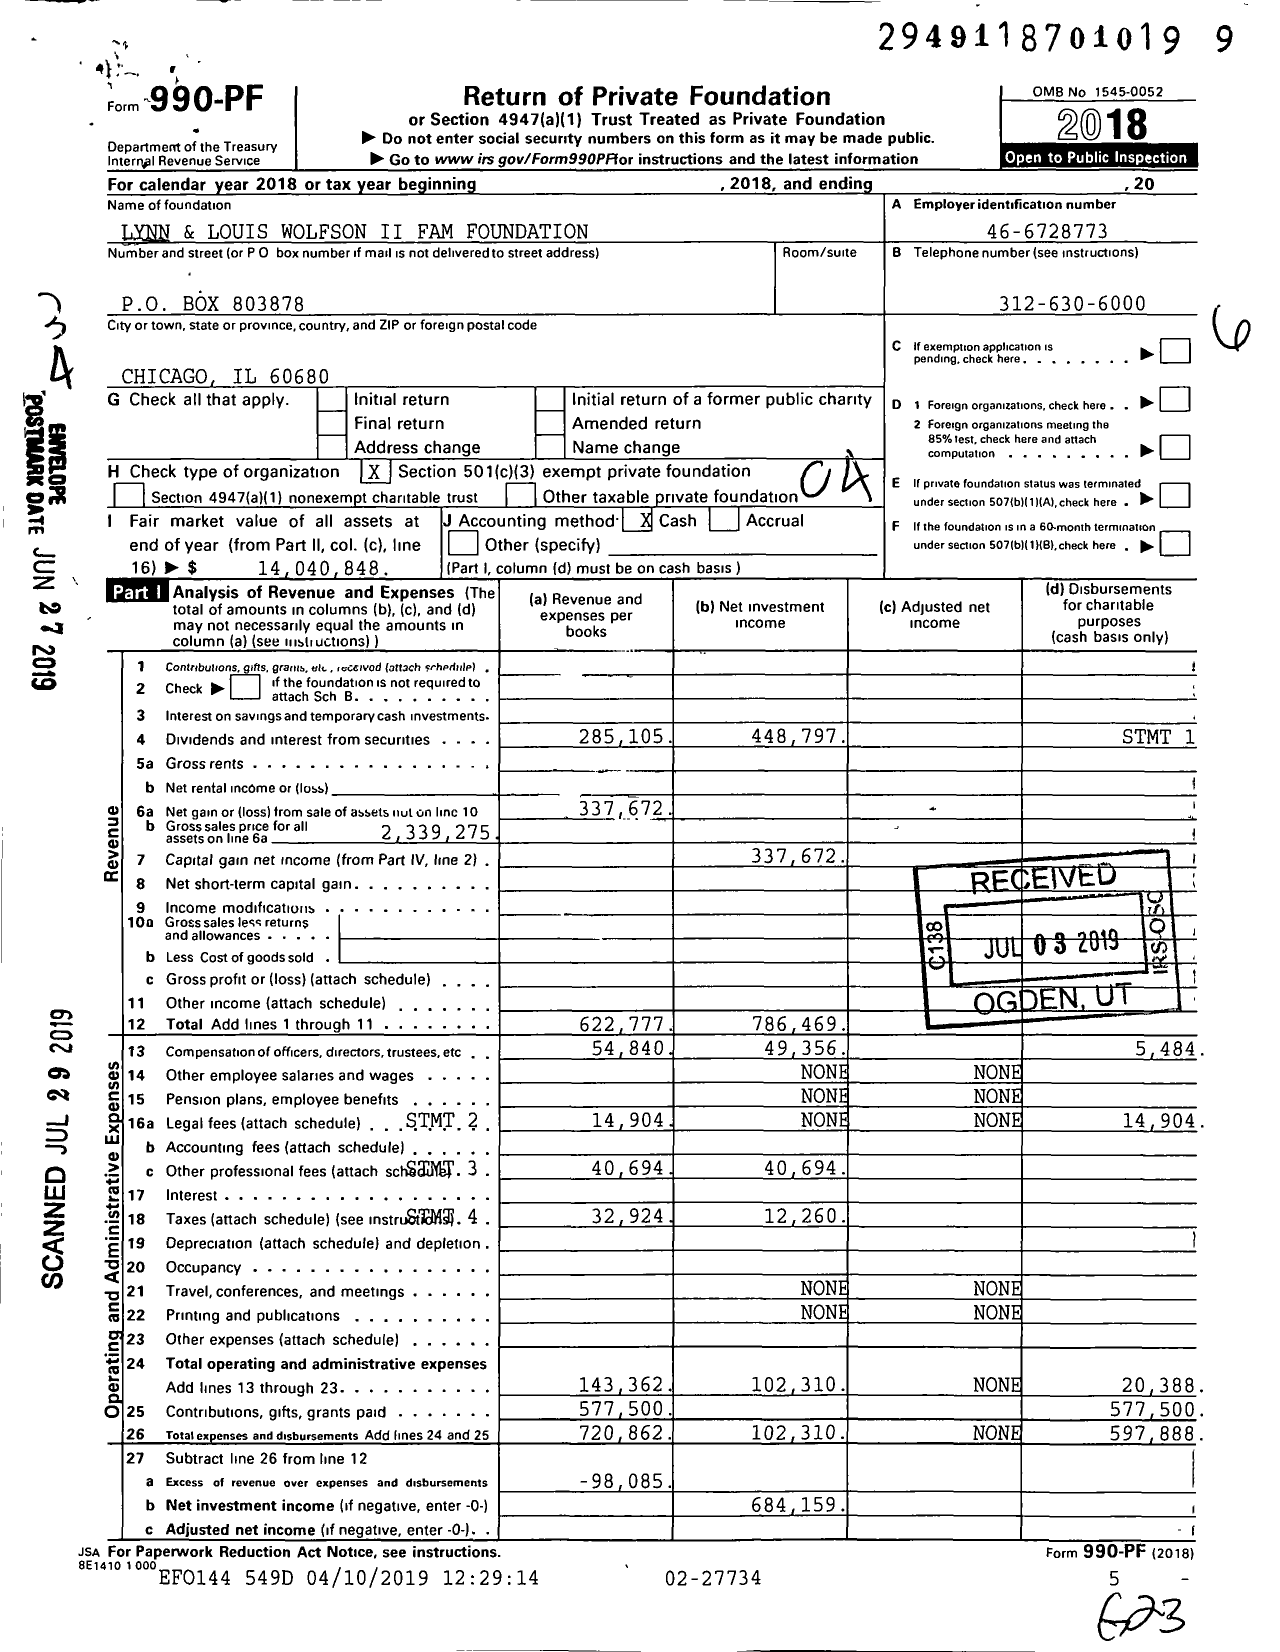 Image of first page of 2018 Form 990PF for Lynn and Louis Wolfson Ii Family Foundation